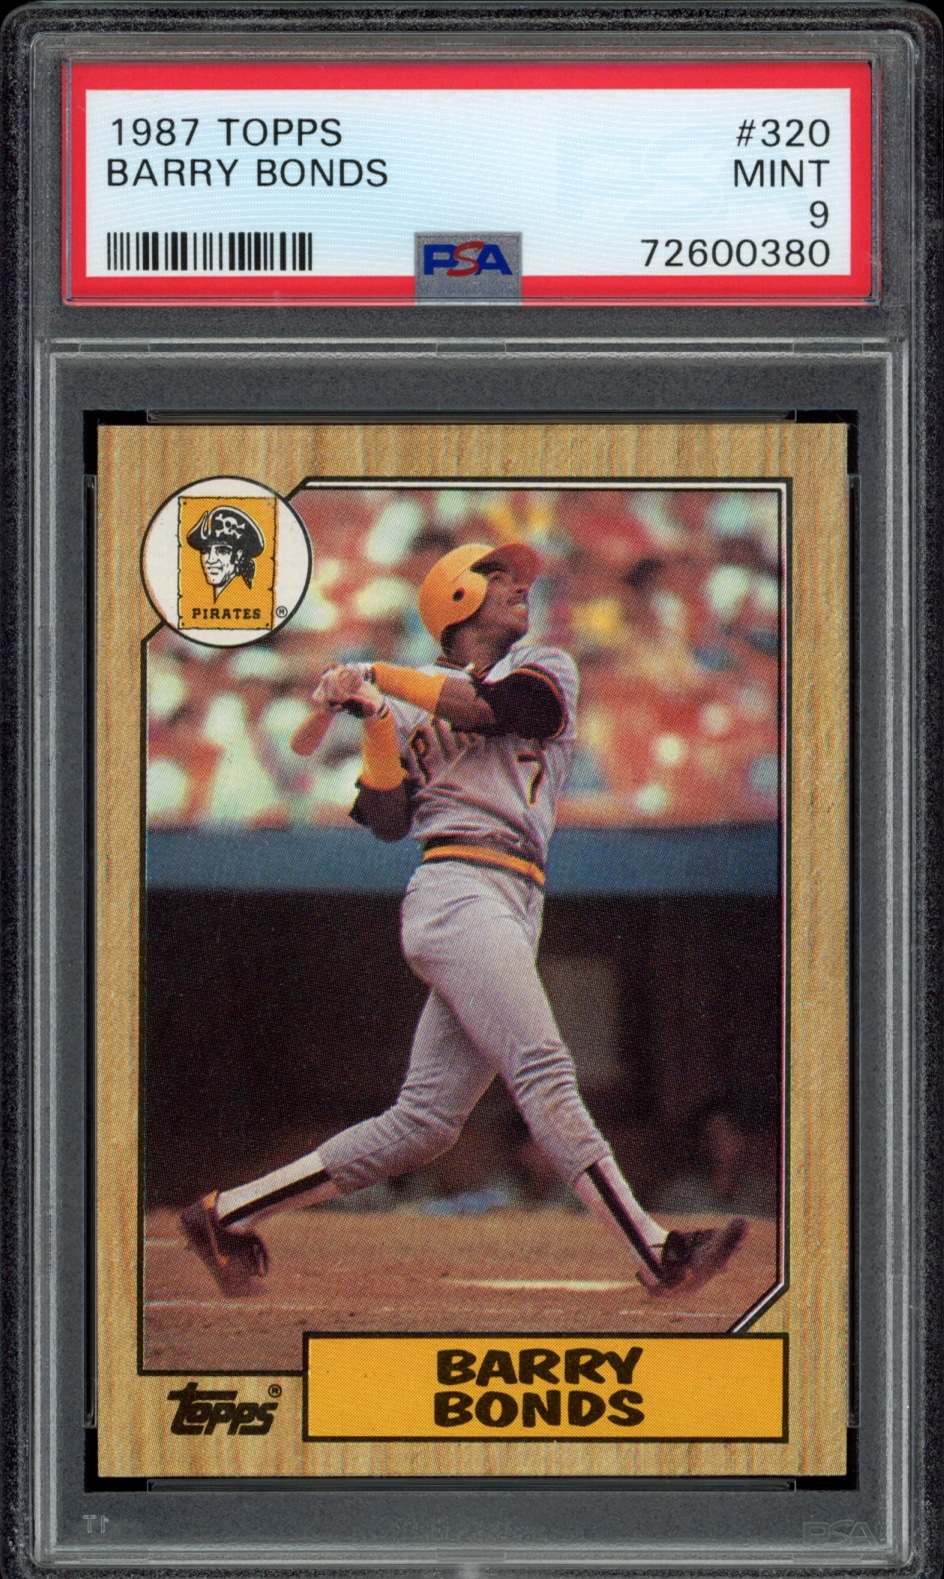 Mint 1987 Topps Barry Bonds #320 baseball card graded PSA 9 in protective case.